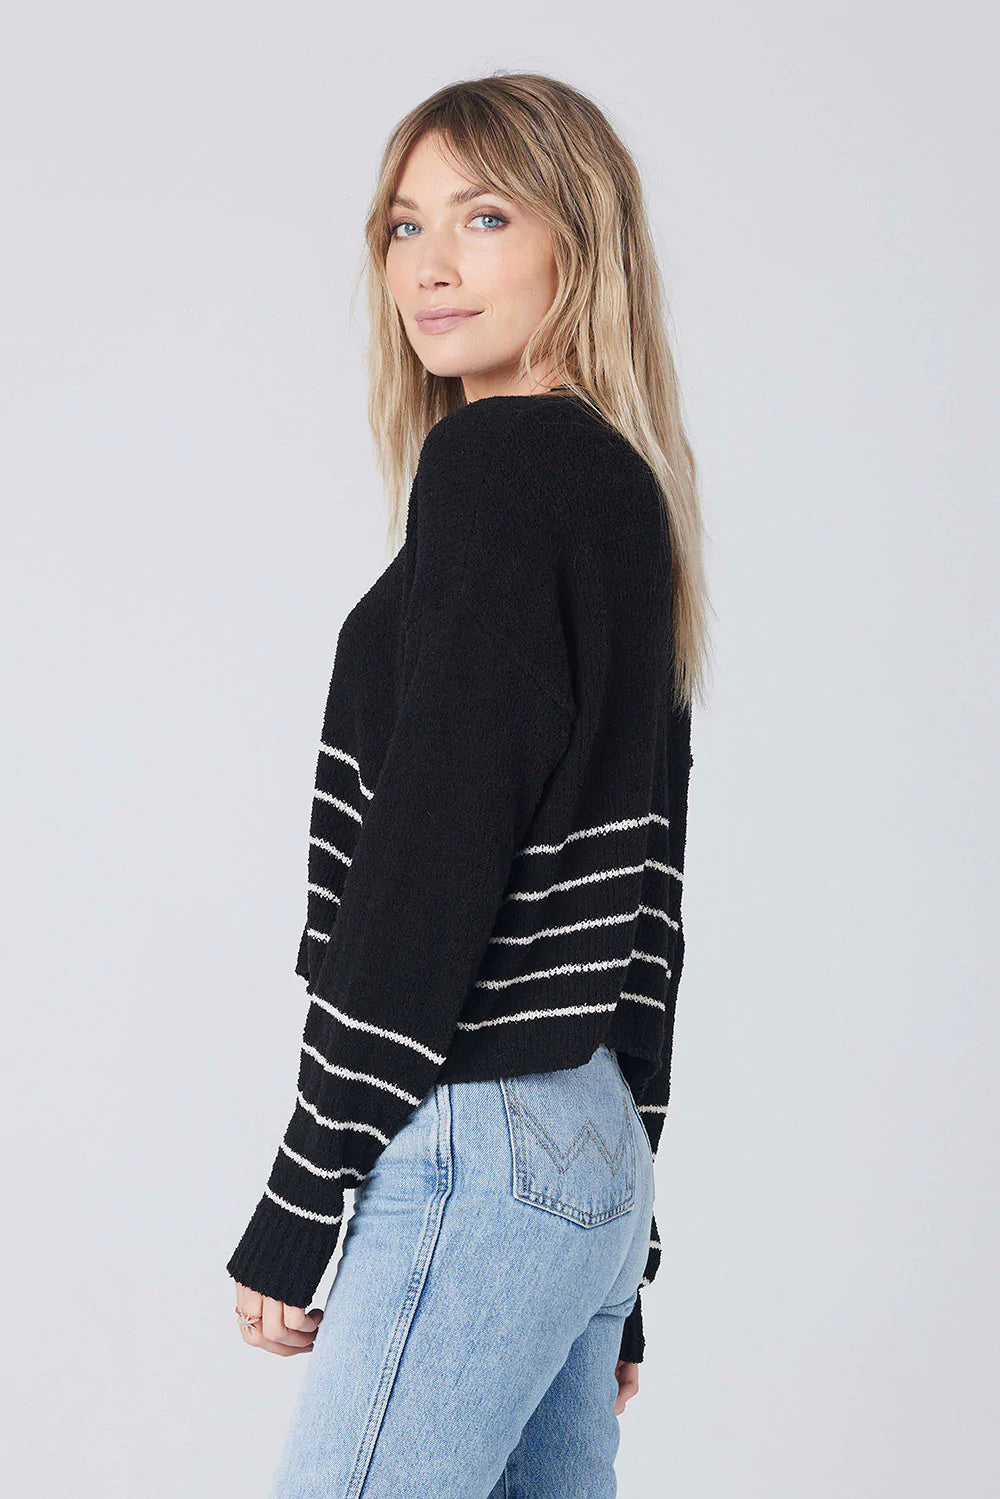 Saltwater Luxe - Tower Sweater - Council Studio